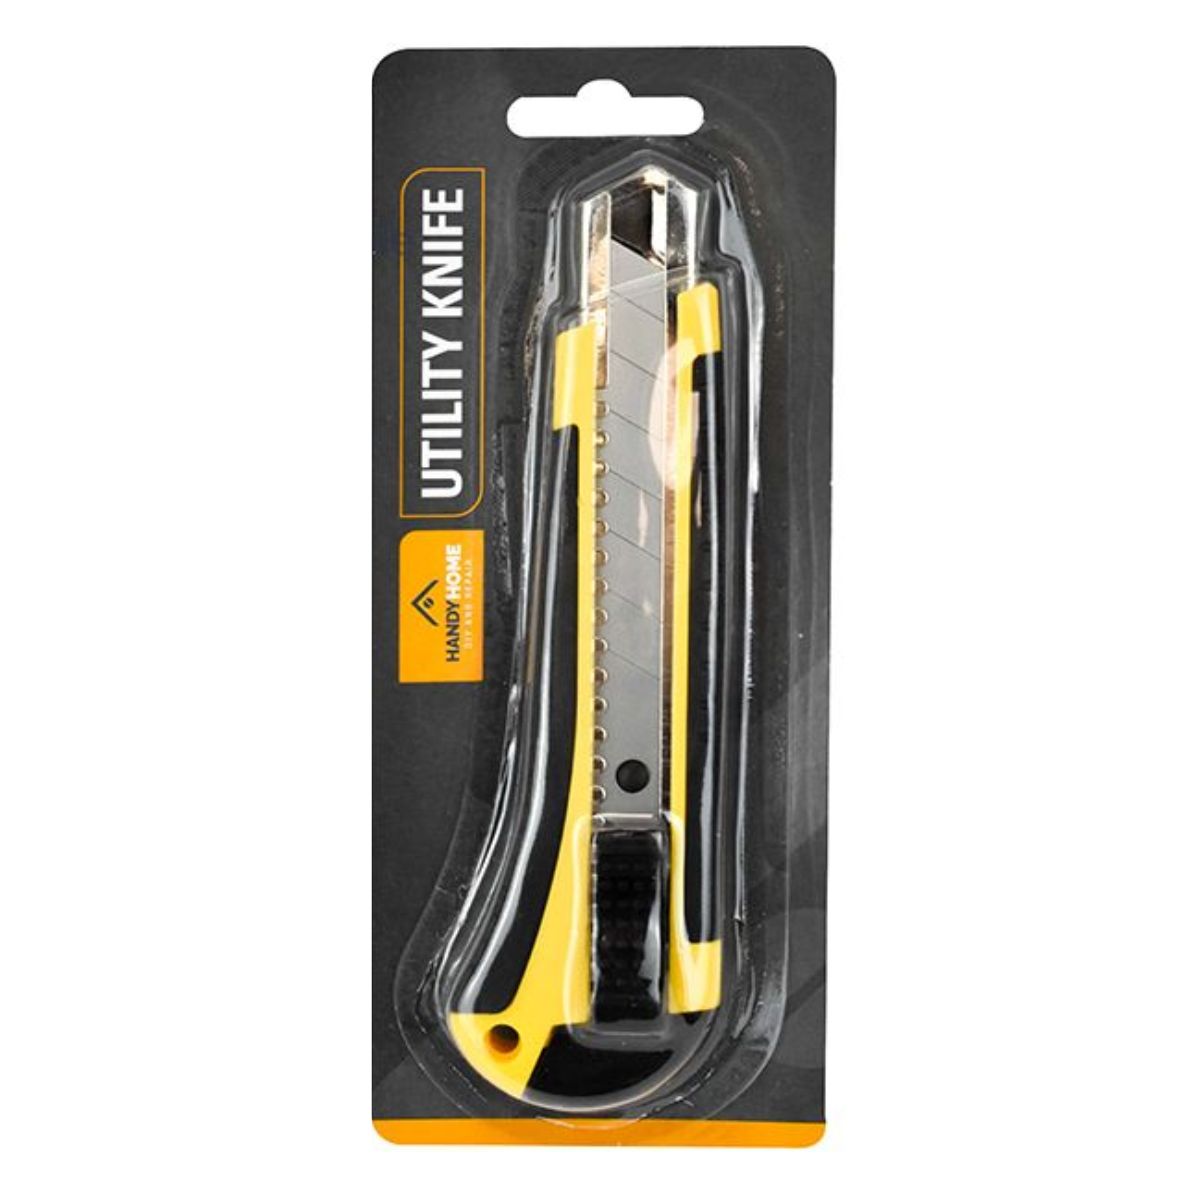 A yellow and black Handy Home utility knife in a package.